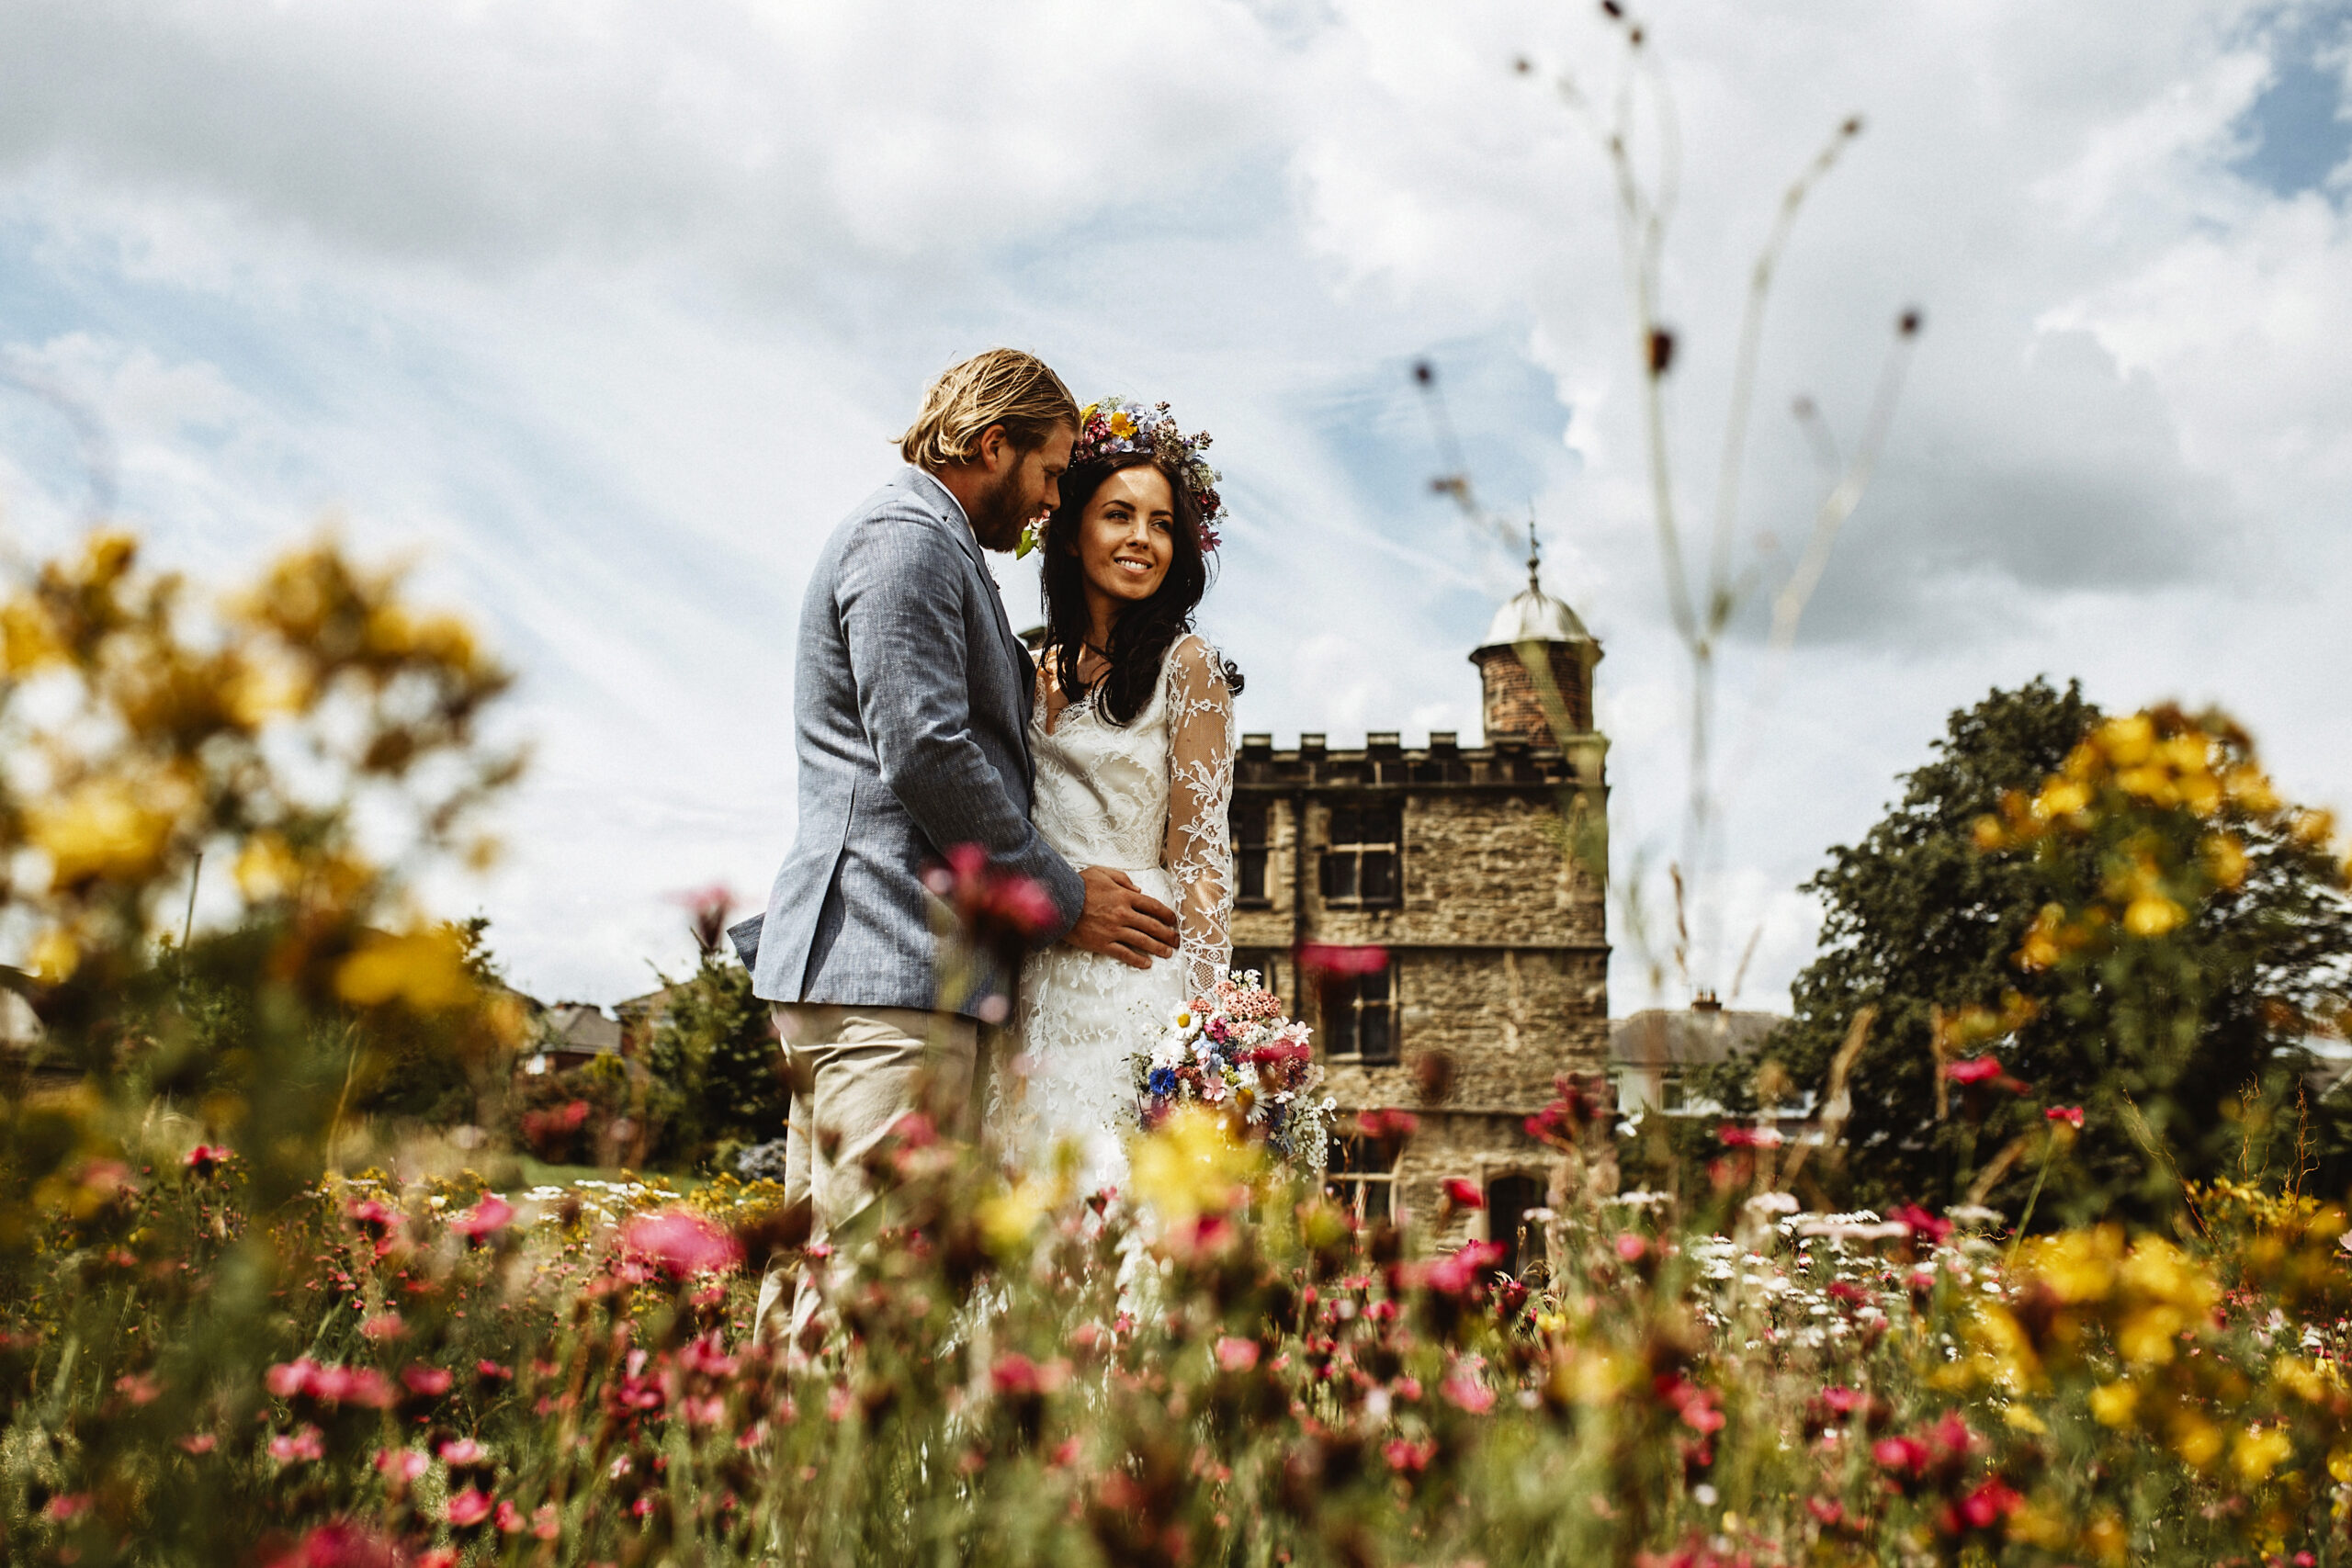 A young wedding couple stand in front of the stone Tudor Turret House at Sheffield Manor Lodge. The bride wears a lace white dress and a flower crown. The groom wears a light blue suit. He holds her as she gazes towards the camera. In the foreground are yellow and pink meadow flowers.